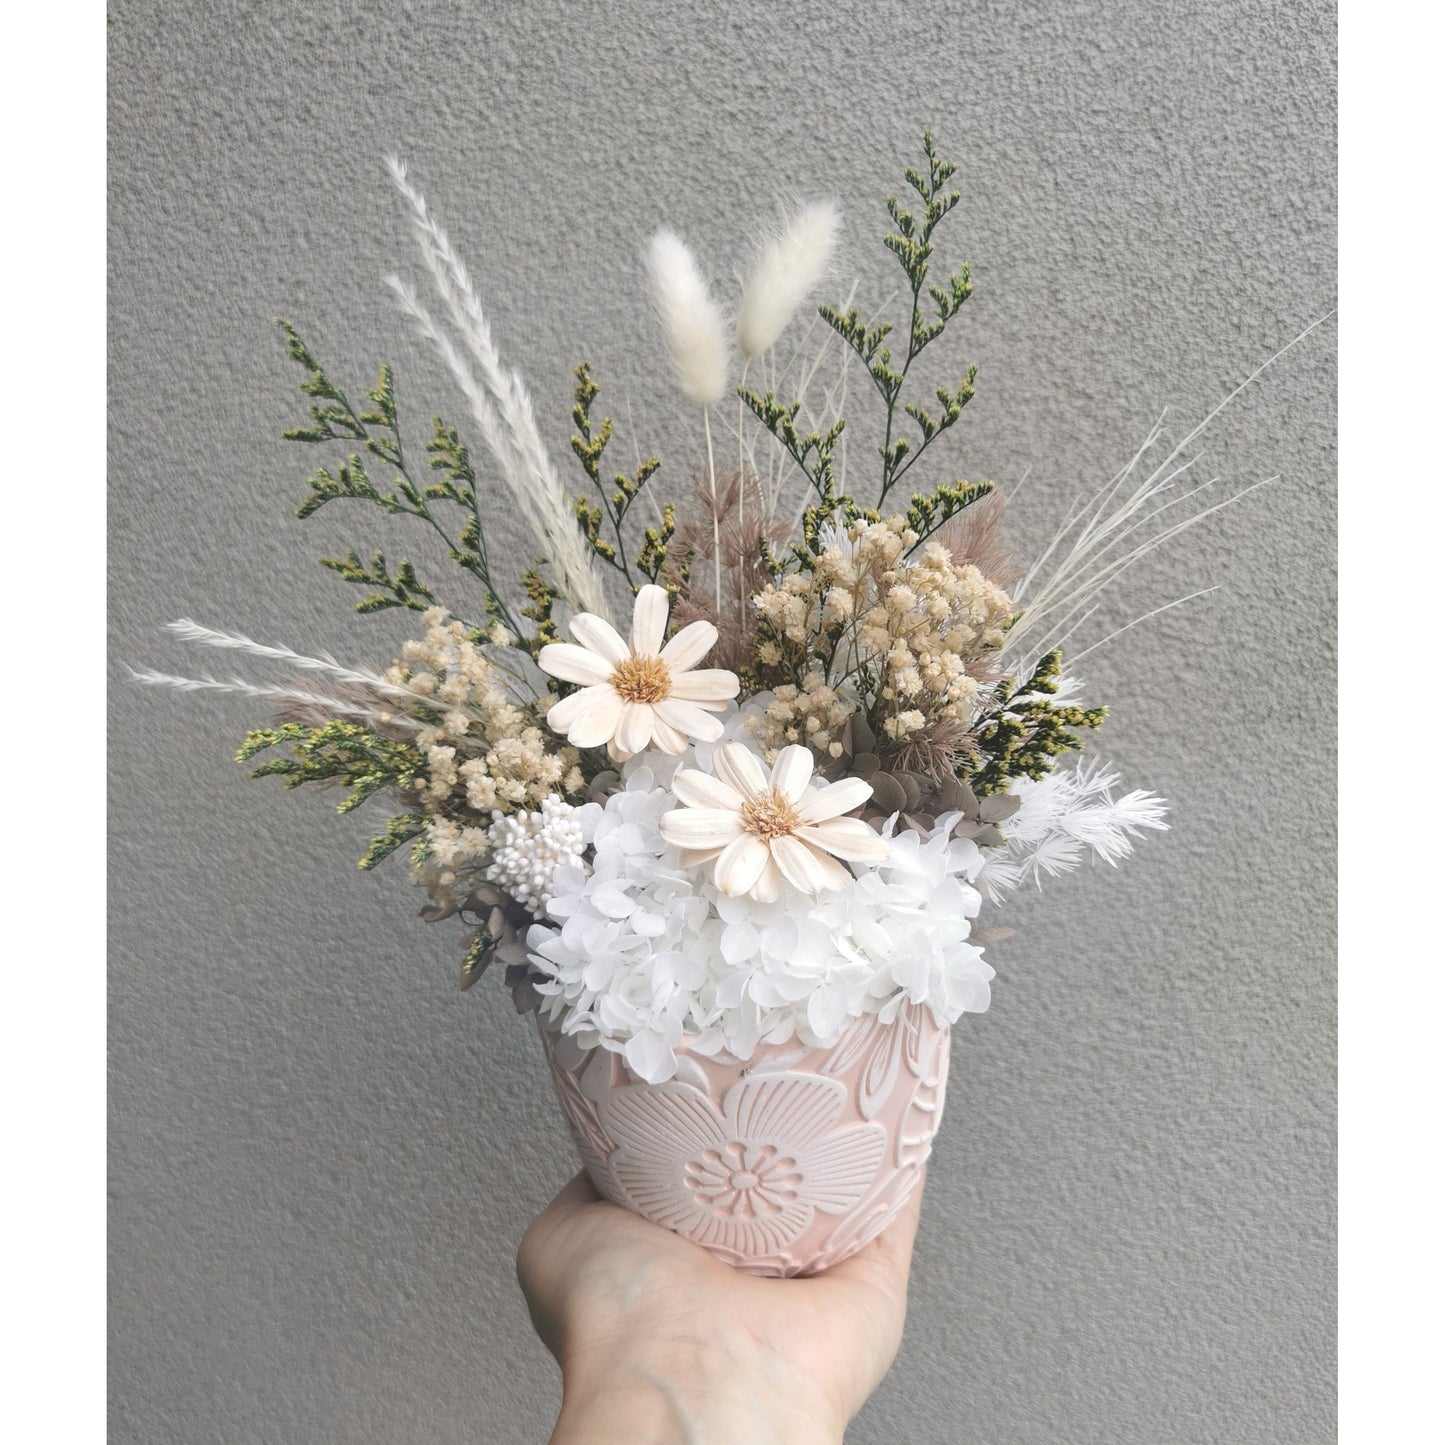 Dried & Preserved flowers in neutral green, white & brown colours in pink & white floral pattern pot. Picture shows arrangement being held by hand against a blank wall